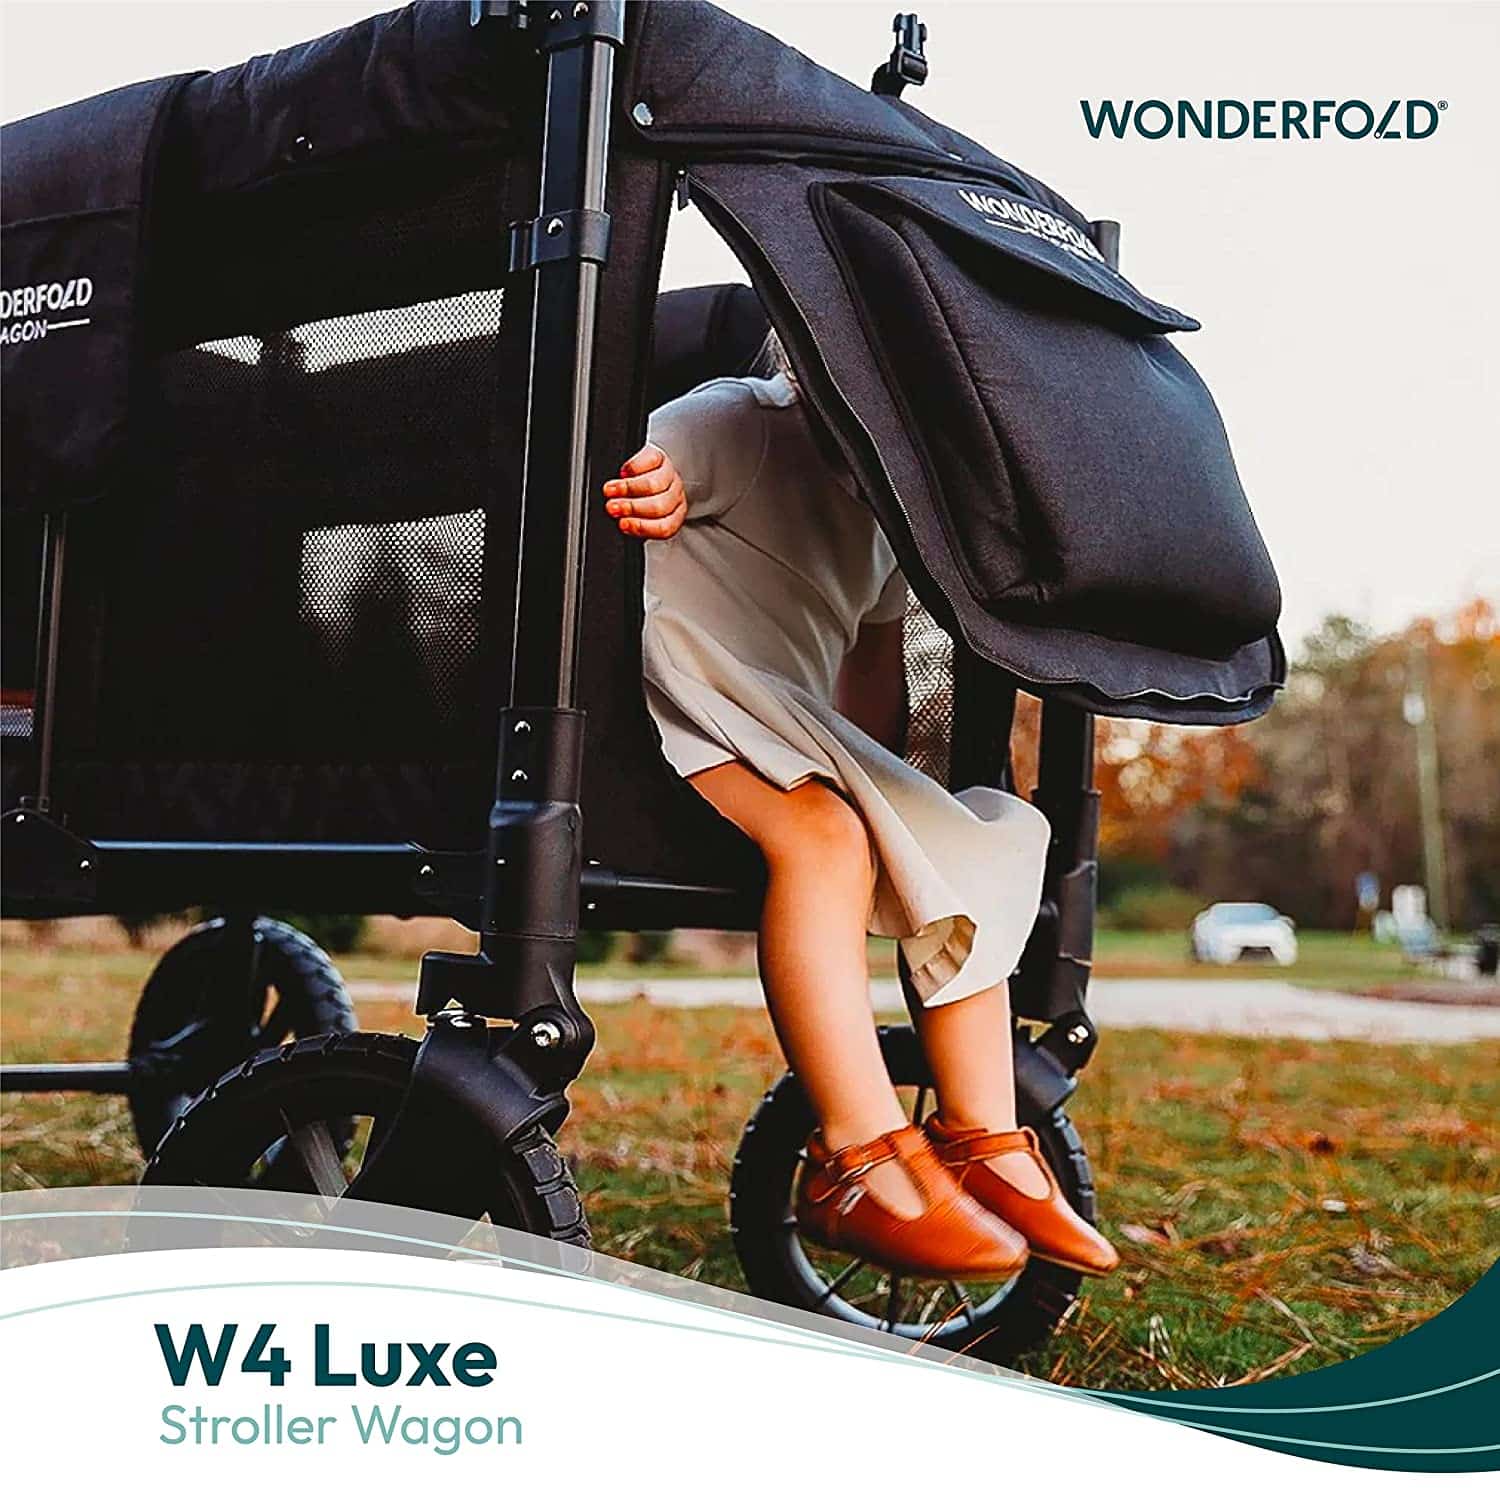 Wonderfold Wagon: A Review of its Design, Features, and Functionality  – June 2023